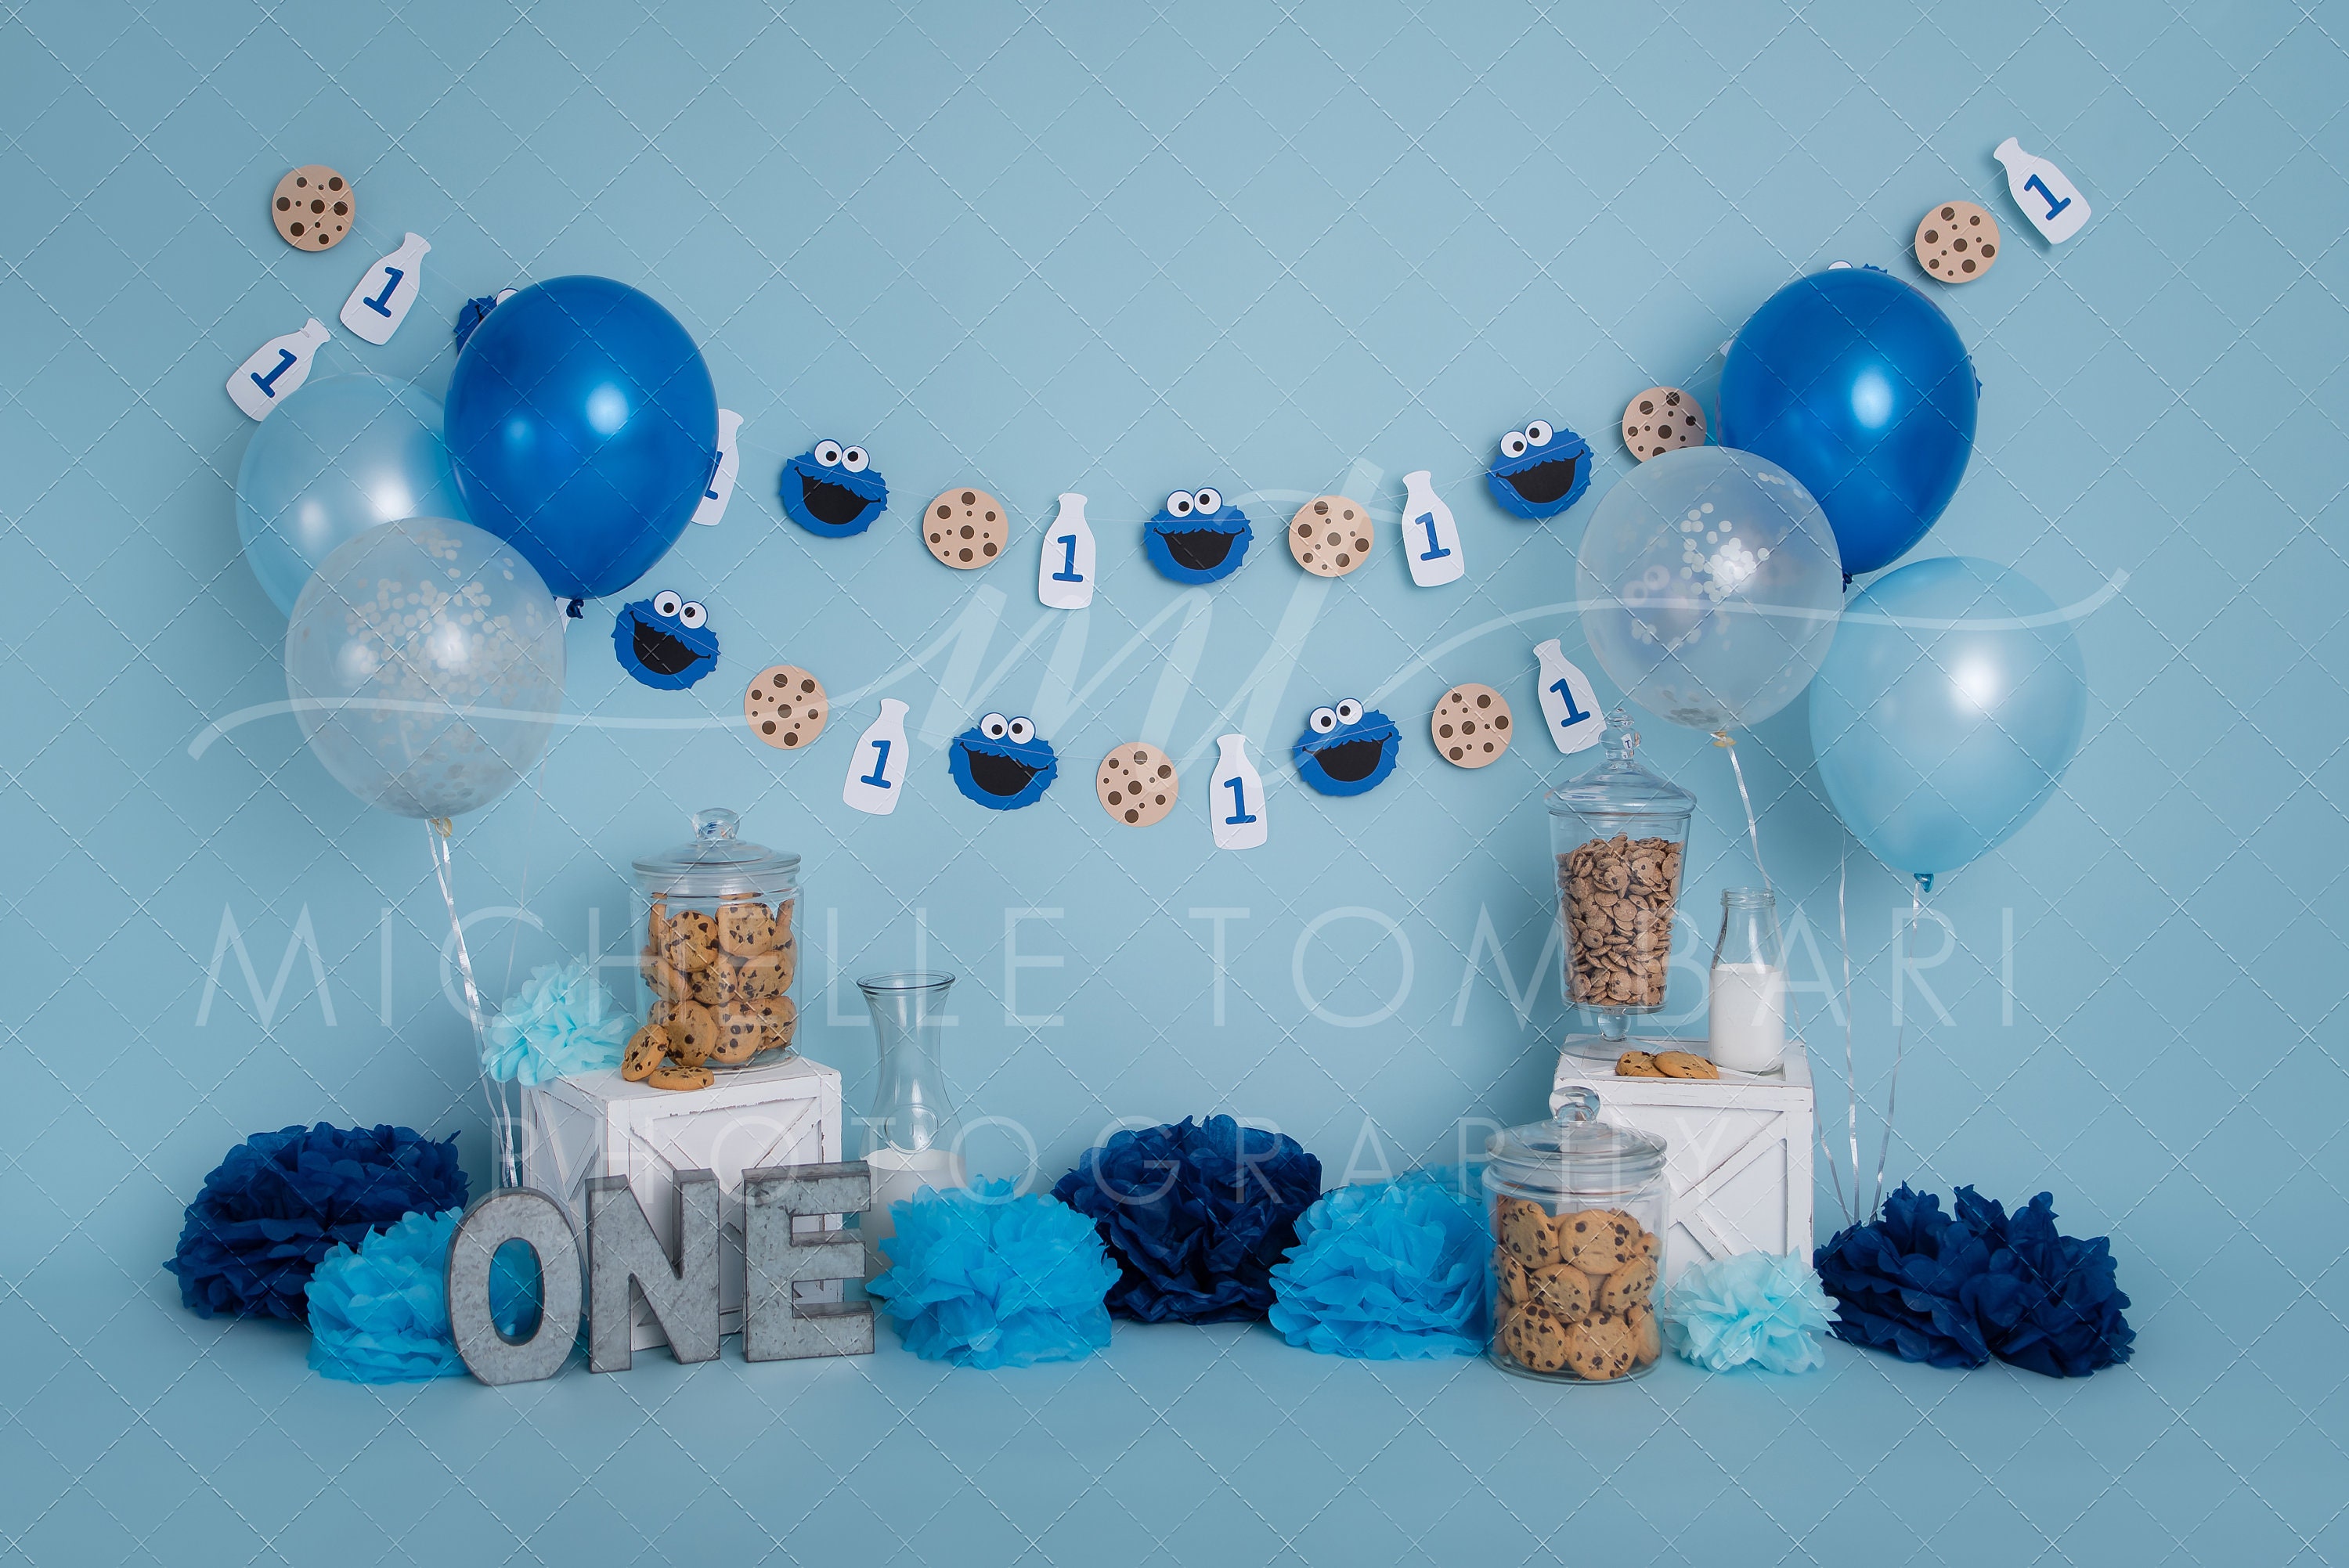 cookiemonster B-shower! Designed by Floral Vision. Cake by Posh Bake, Balloon Decor